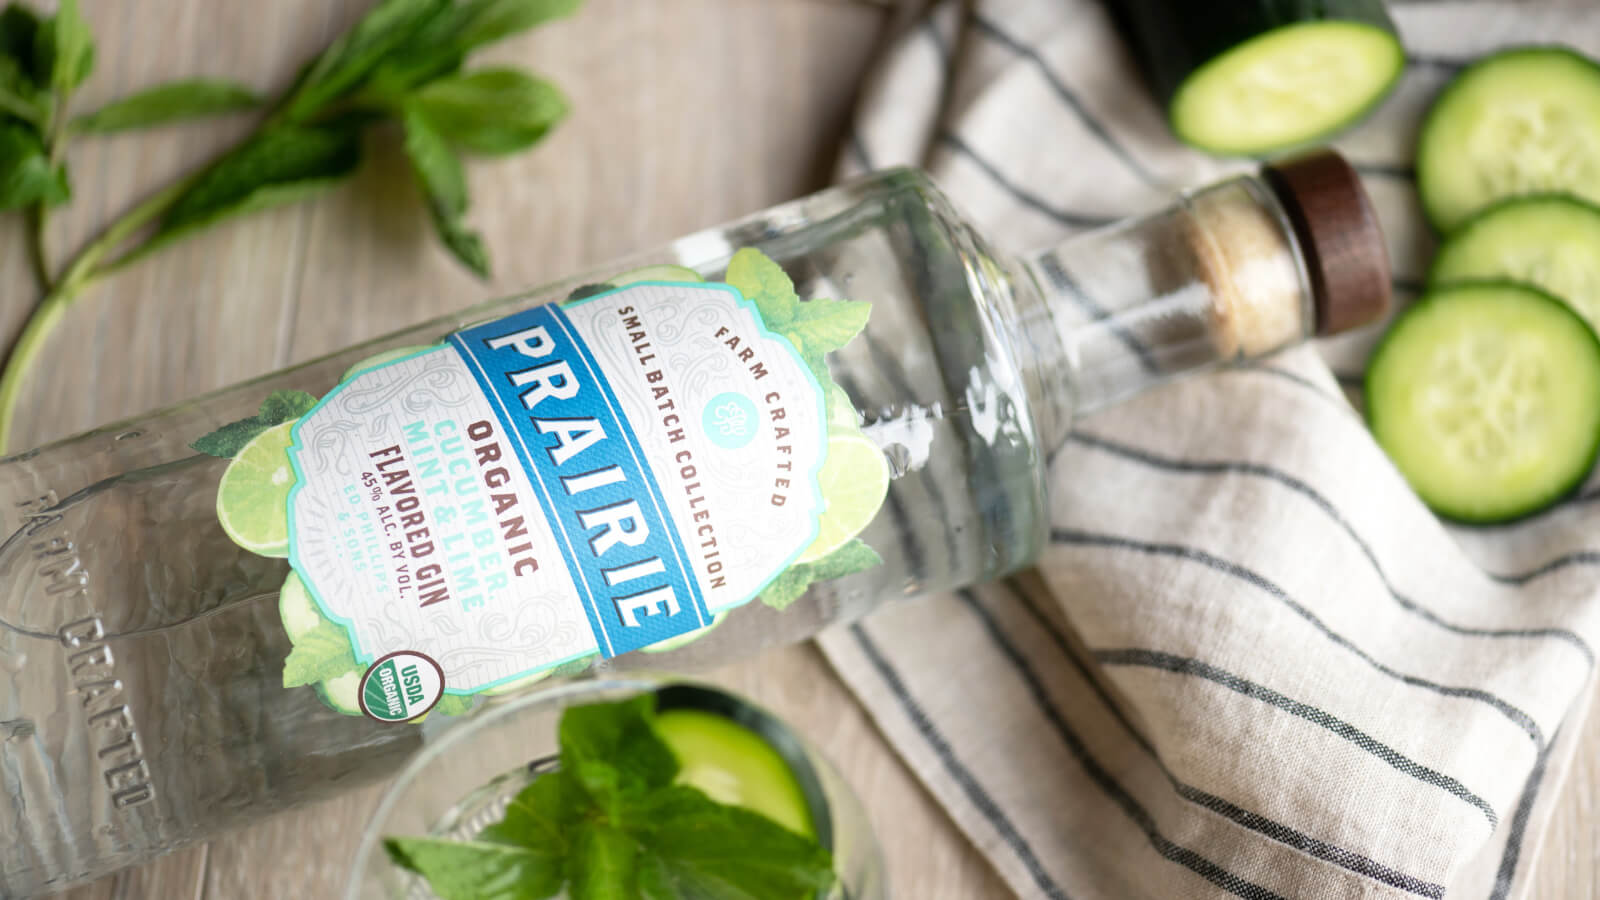 A top down view of a bottle of prairie organic spirits with cucumber slices